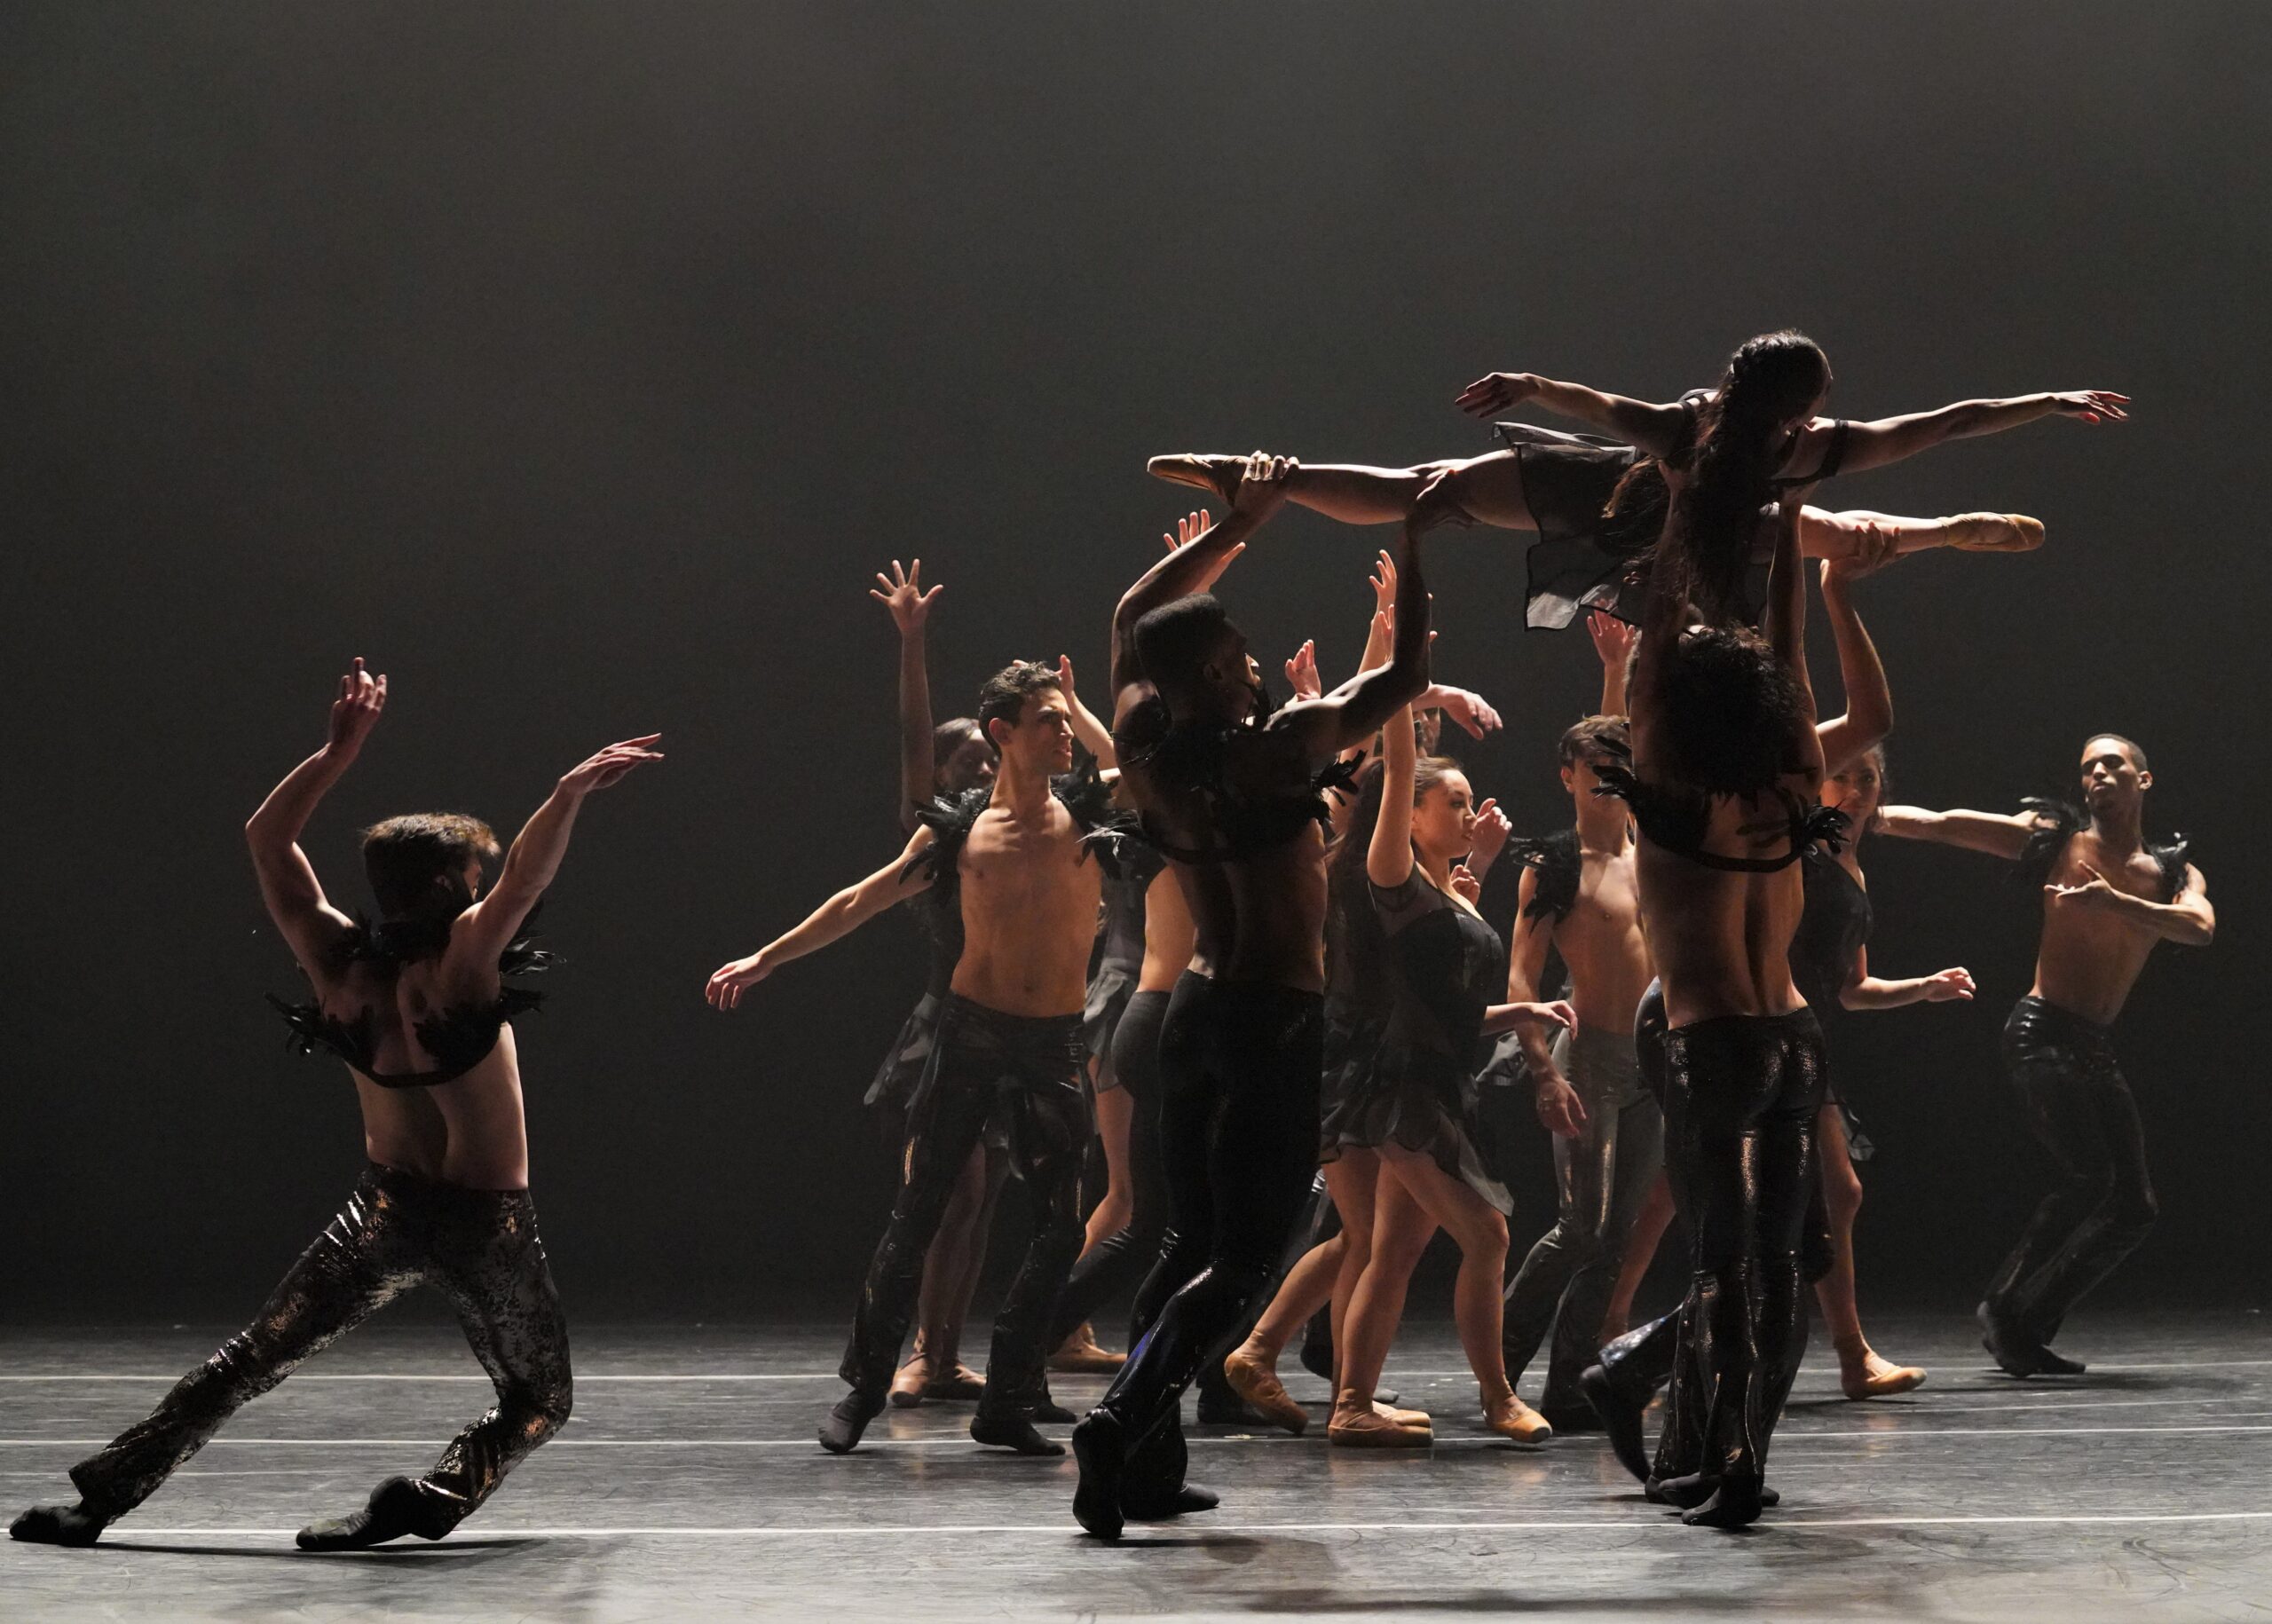 Performers from Complexions Contemporary Ballet dancing in an on-stage performance